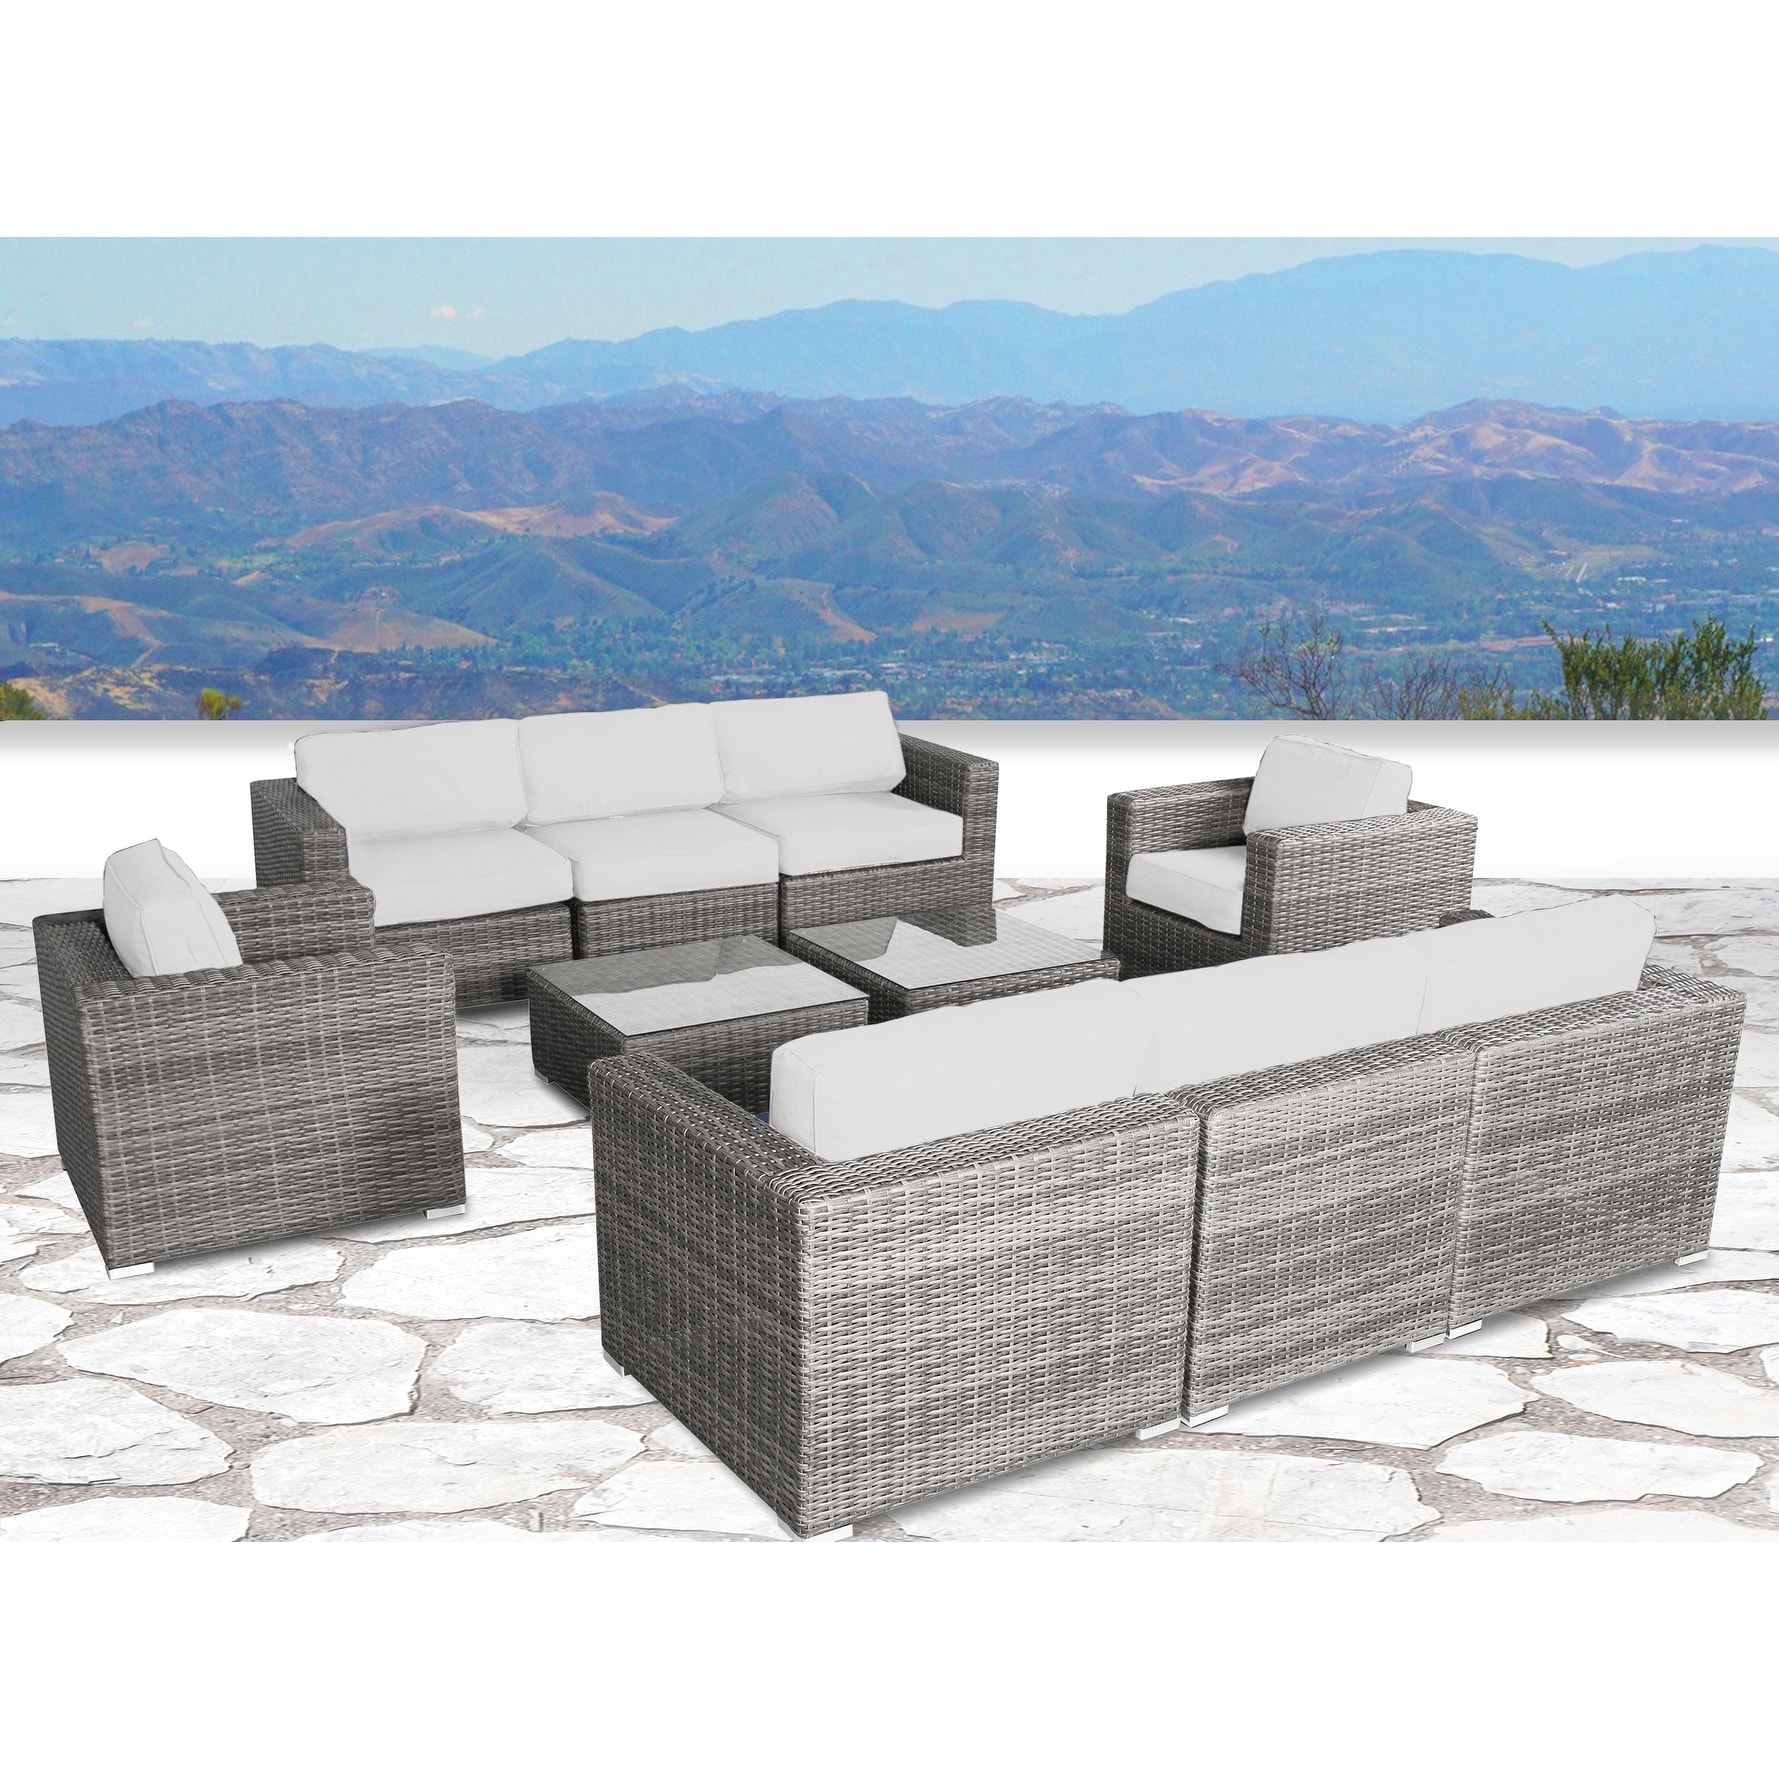 Lsi 10 Piece Rattan Sectional Seating Group With Cushions